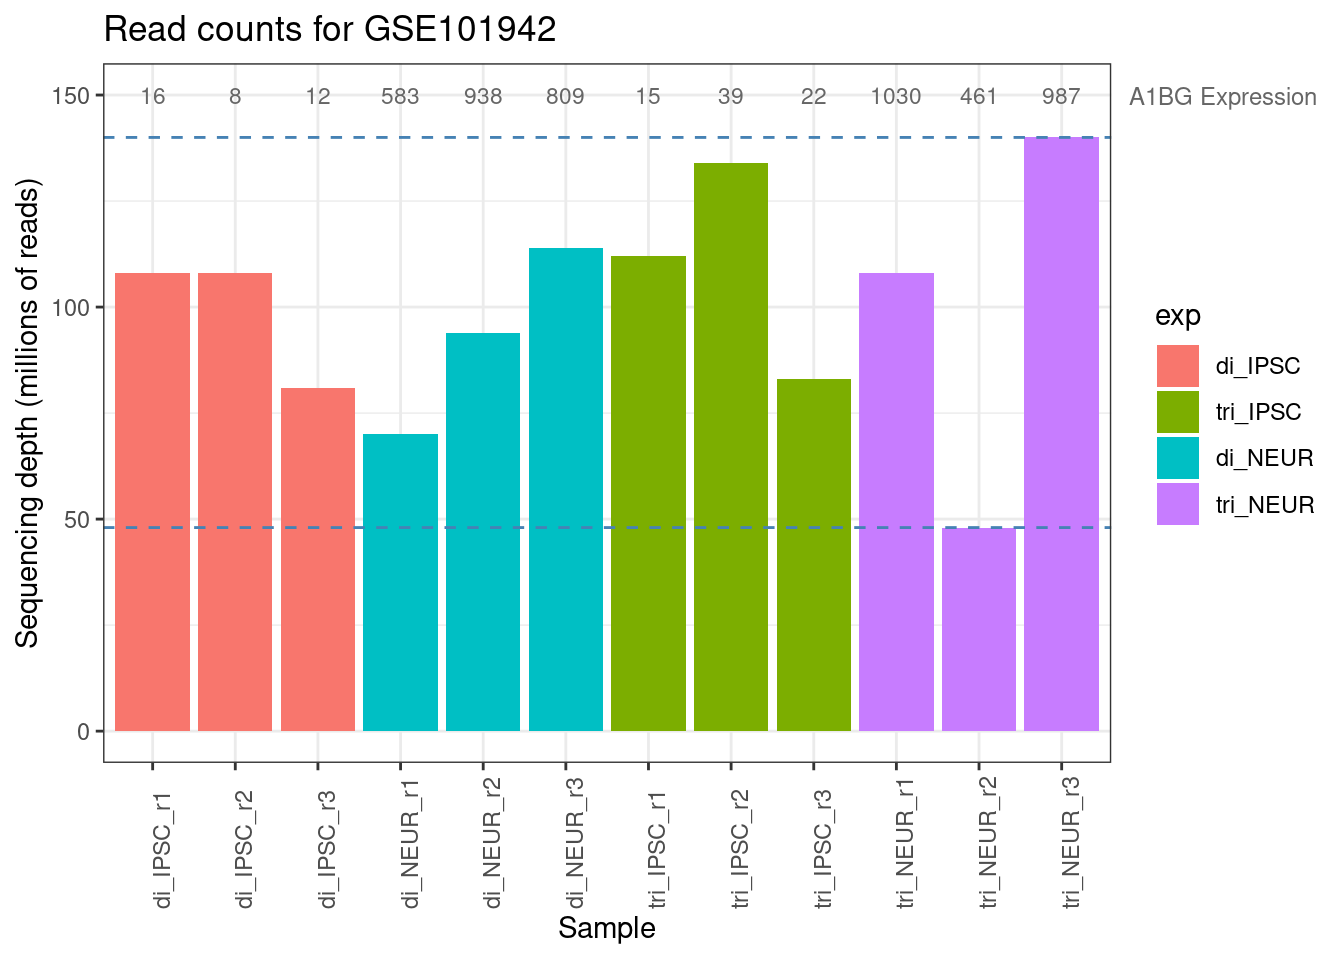 Library sizes for all samples from GSE101942